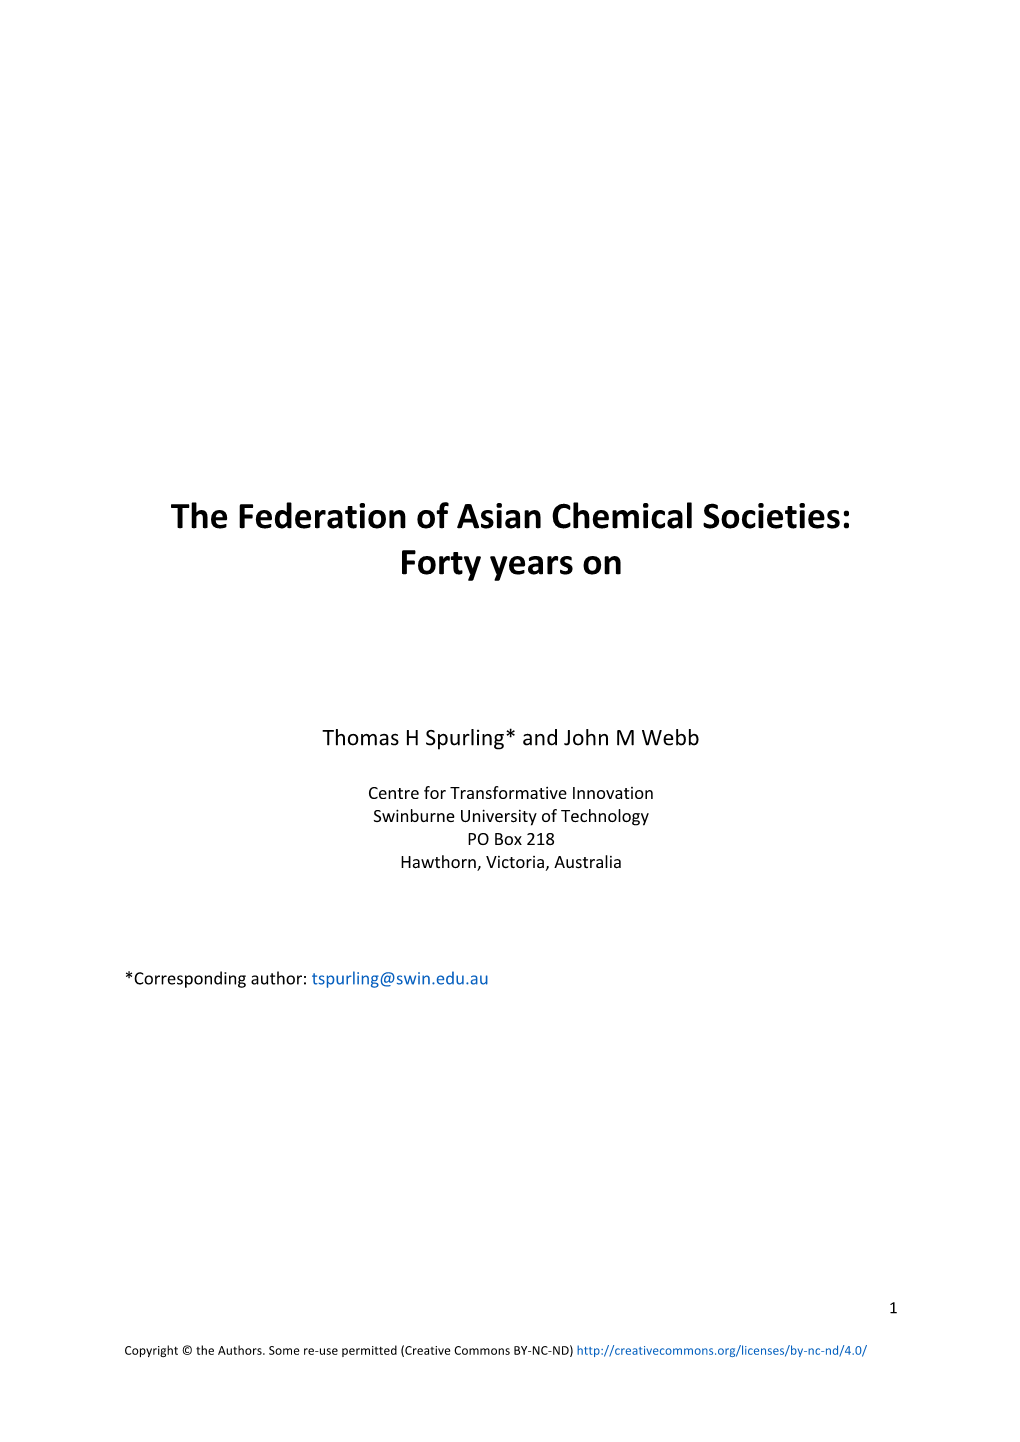 The Federation of Asian Chemical Societies: Forty Years On